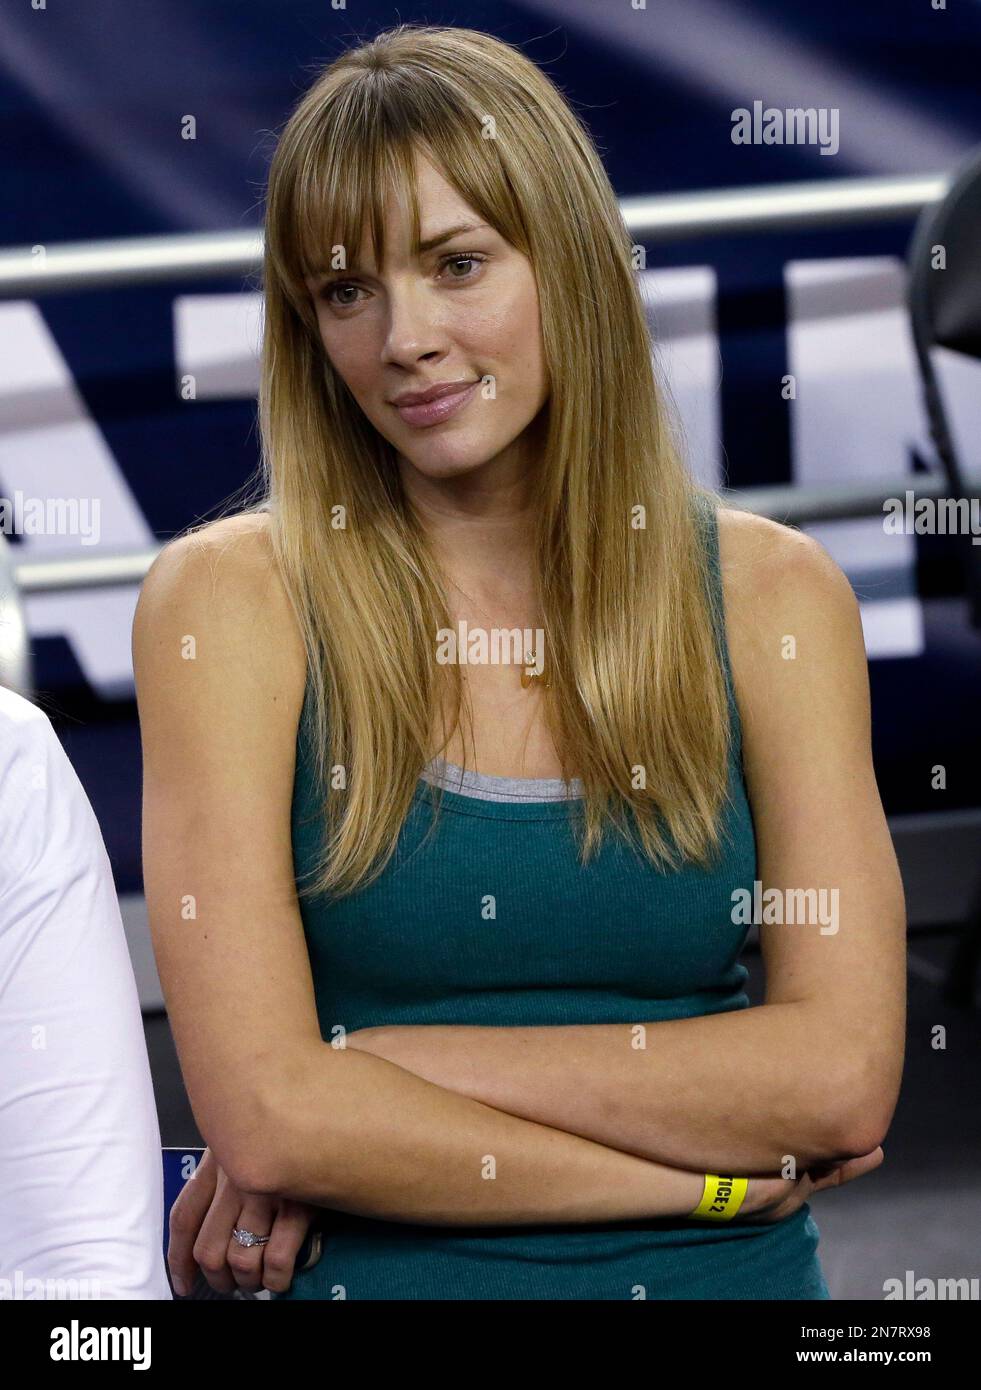 Amanda Marcum, wife of Florida Gulf Coast head coach Andy Enfield, watches during practice for a regional semifinal game in the NCAA college basketball tournament, Thursday, March 28, 2013, in Arlington, Texas. Florida Gulf Coast faces Florida on Friday. (AP Photo/David J. Phillip) Stock Photo